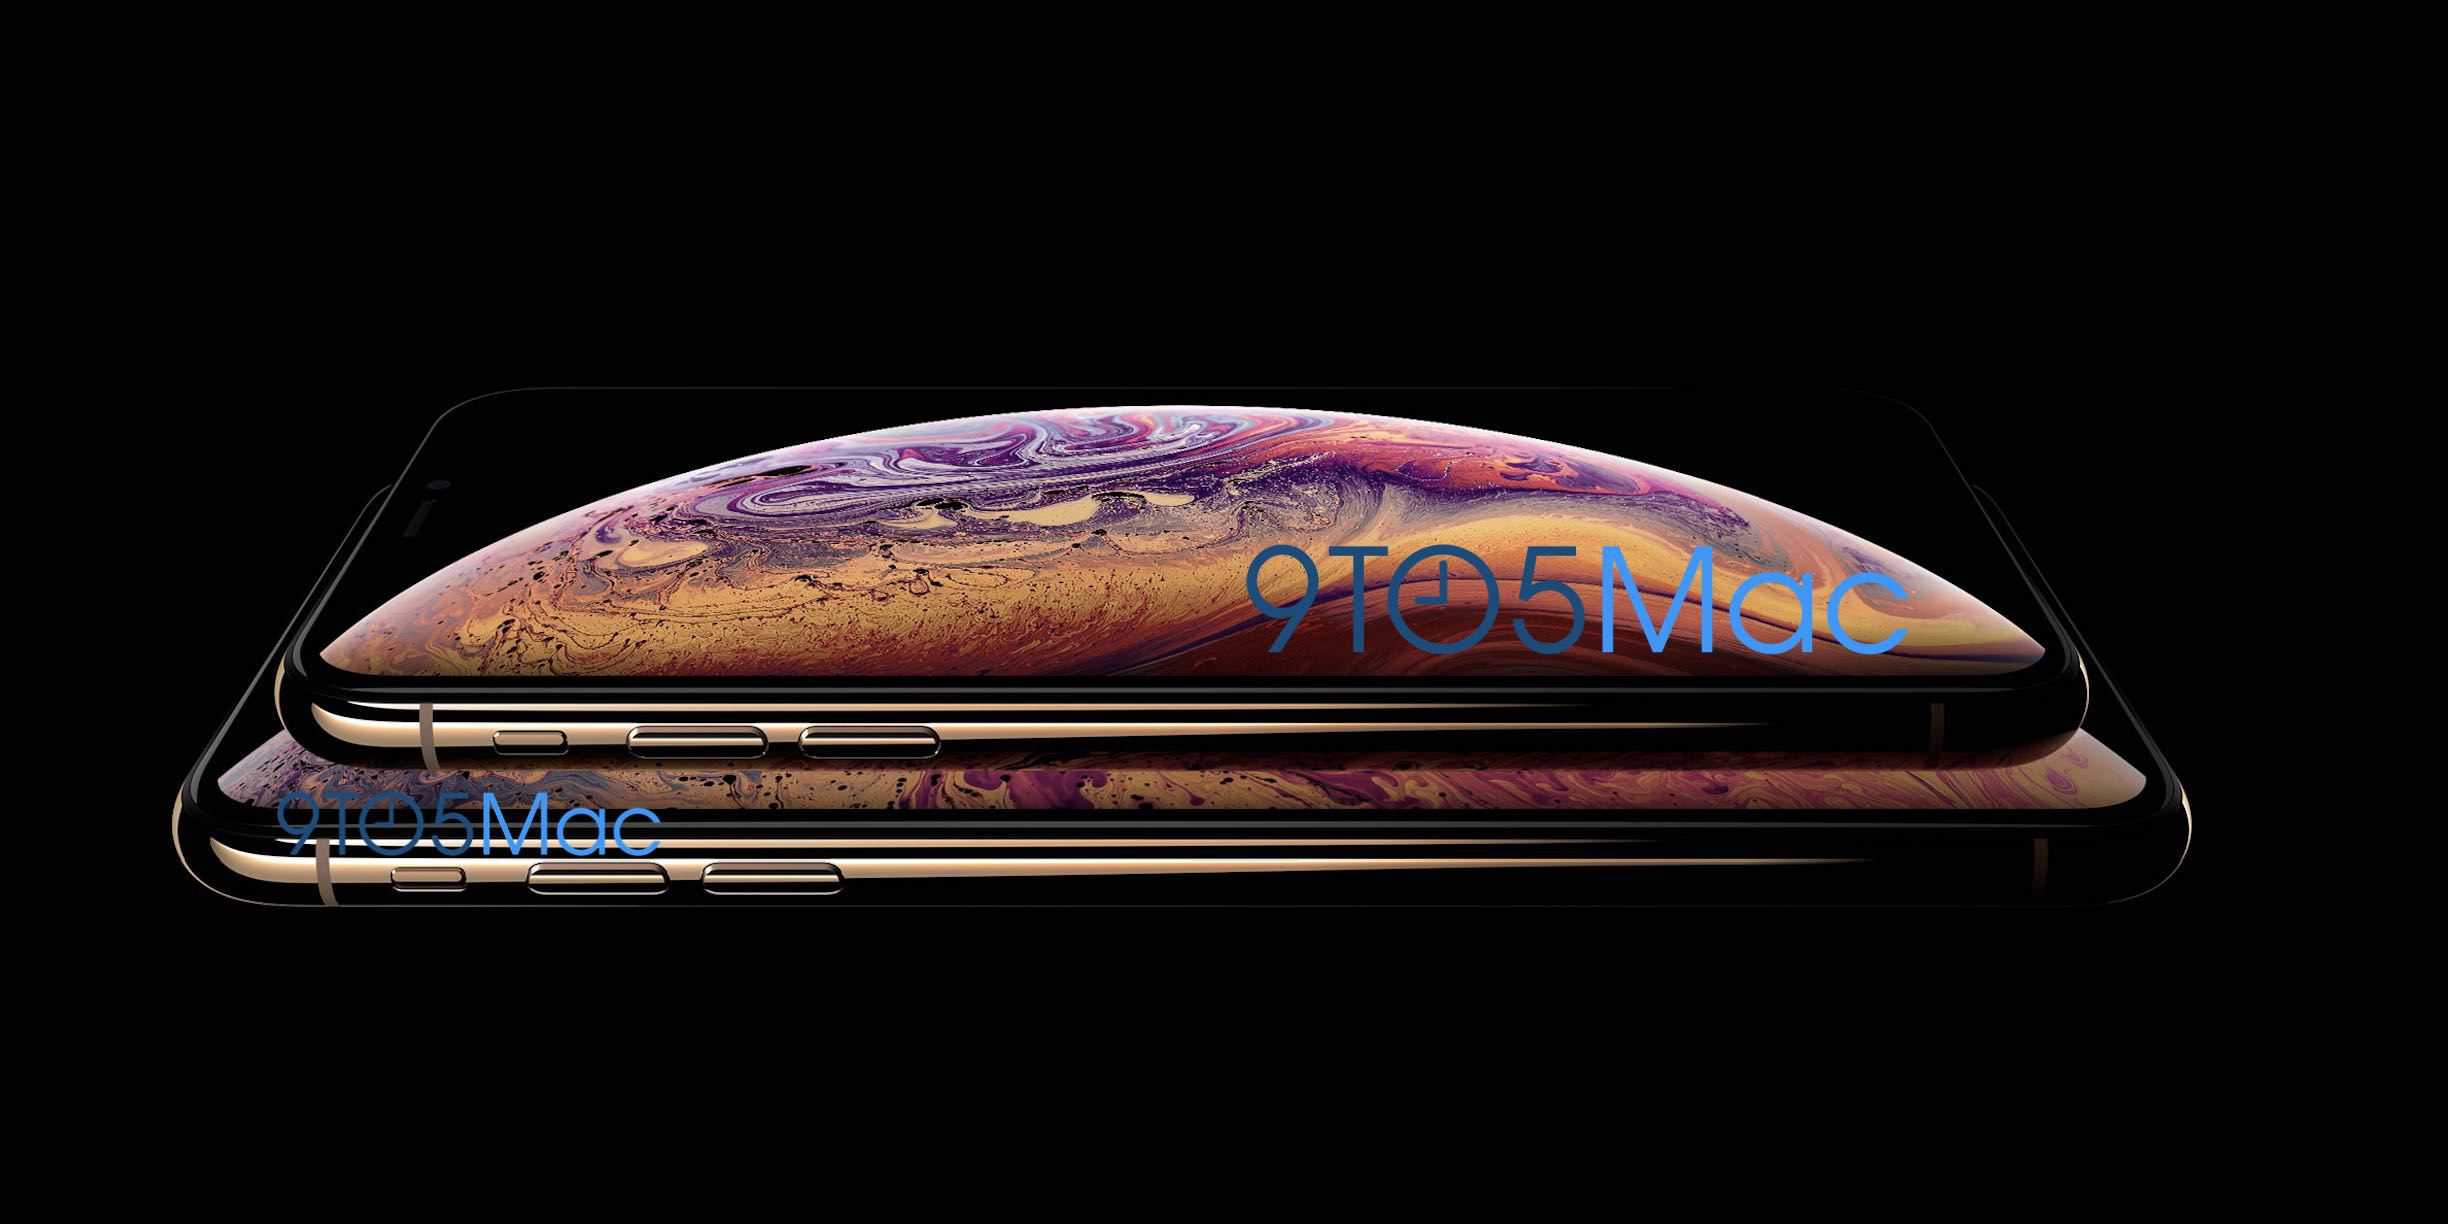 Grab the new iPhone XS wallpaper right here | Cult of Mac